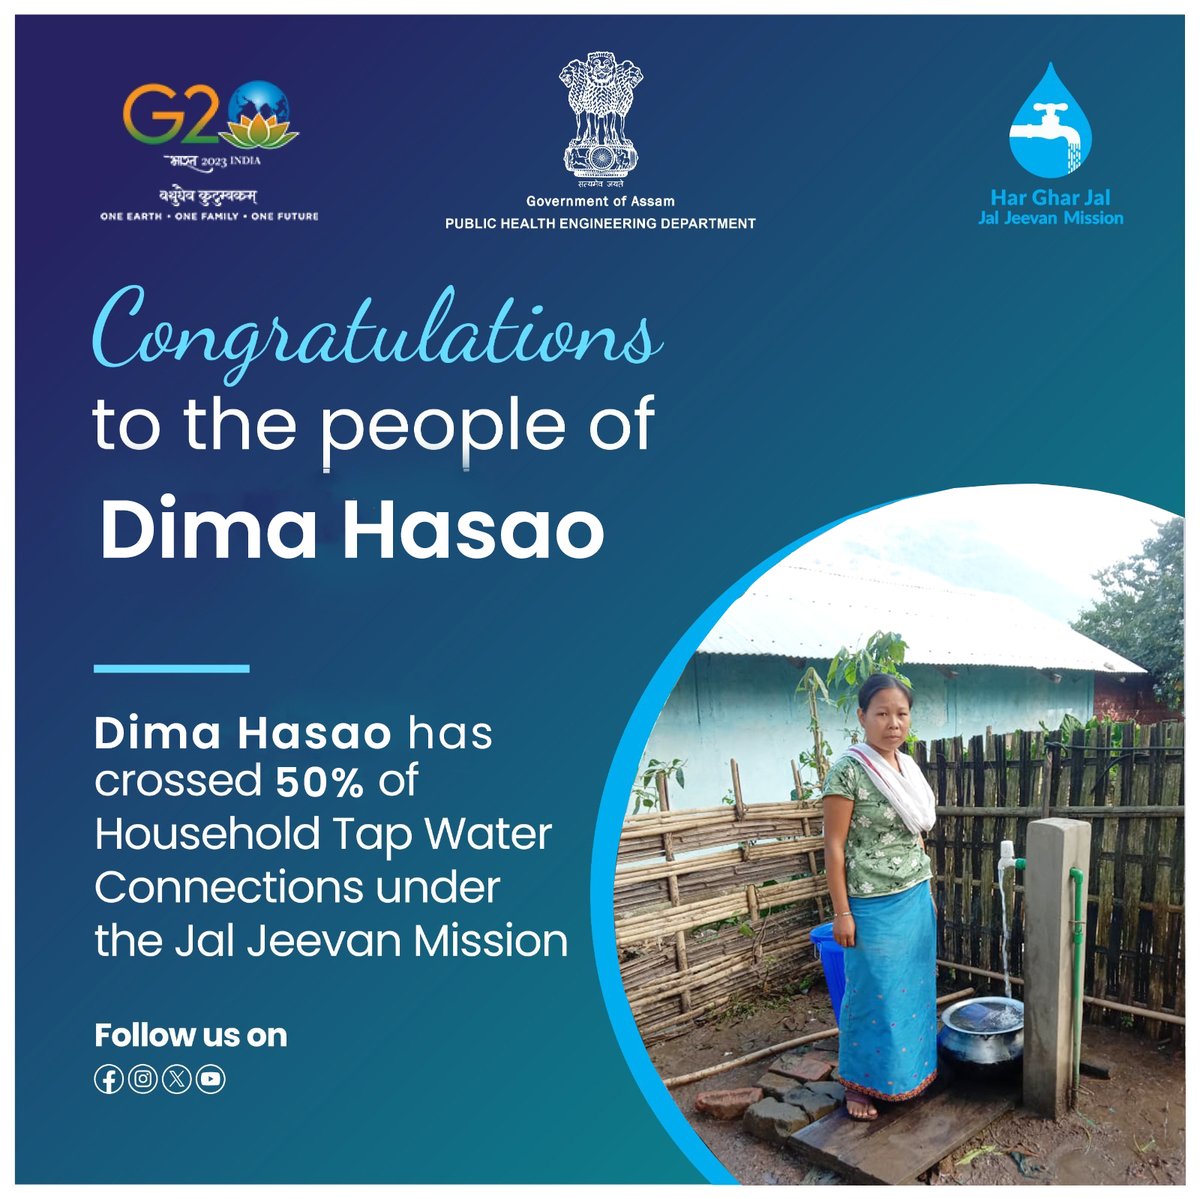 Congratulations to the people of #DimaHasao, Assam.

Dima Hasao has crossed 50% of Household Tap Water Connections under the Jal Jeevan Mission.

#jjmassam #JalJeevanMission #HarGharJal #assam